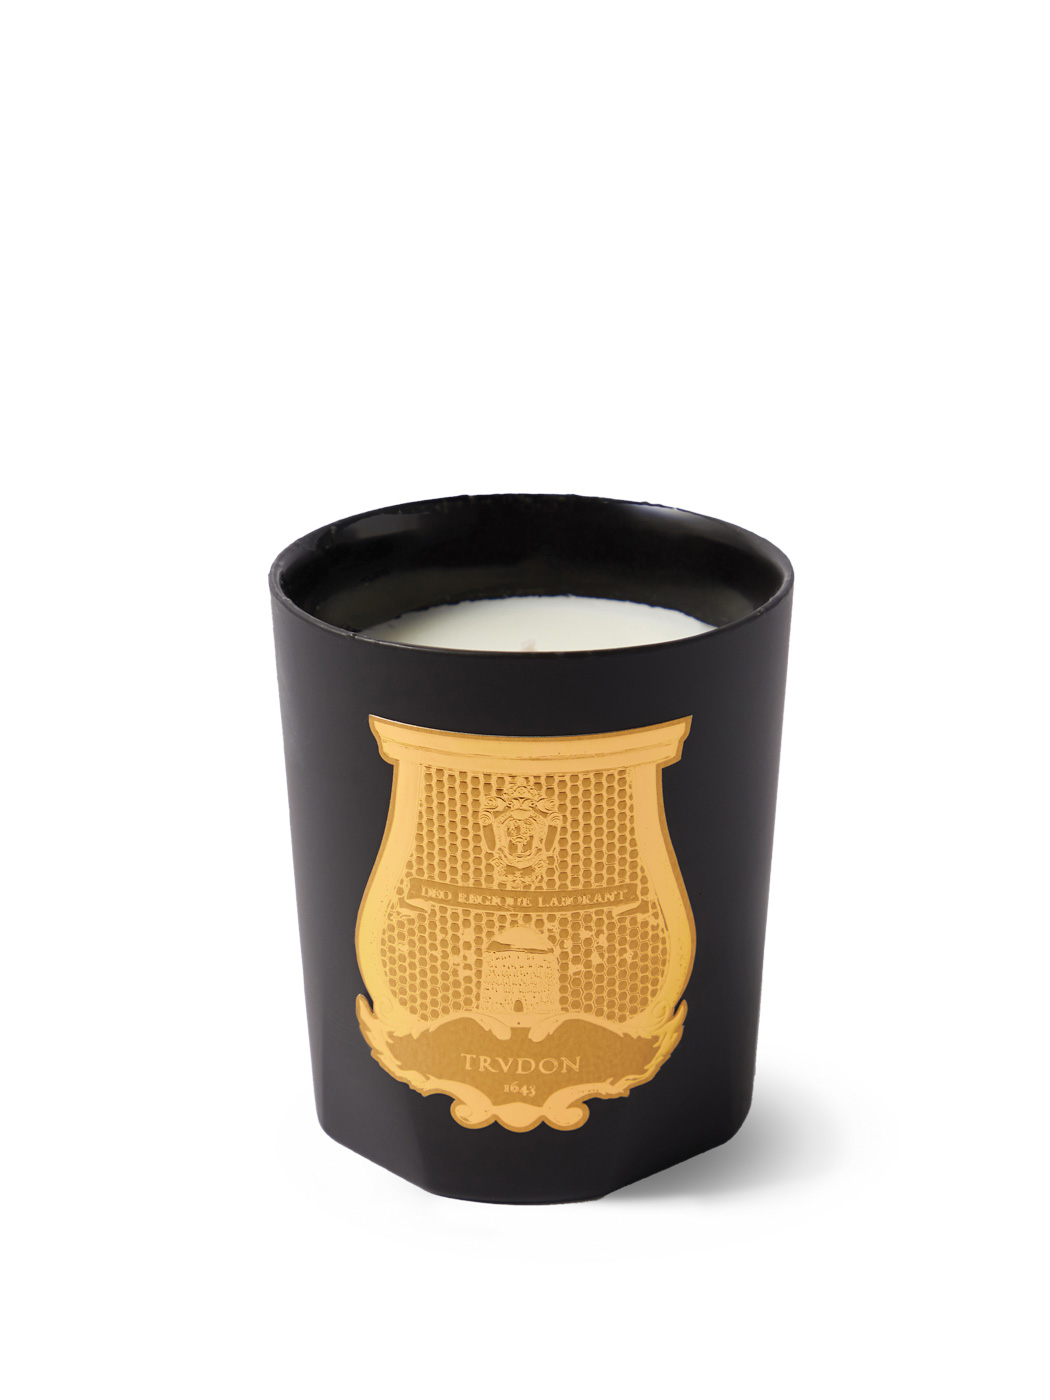 80 Cire Trudon, Mary Scented Candle, Matchesfashion.com.us